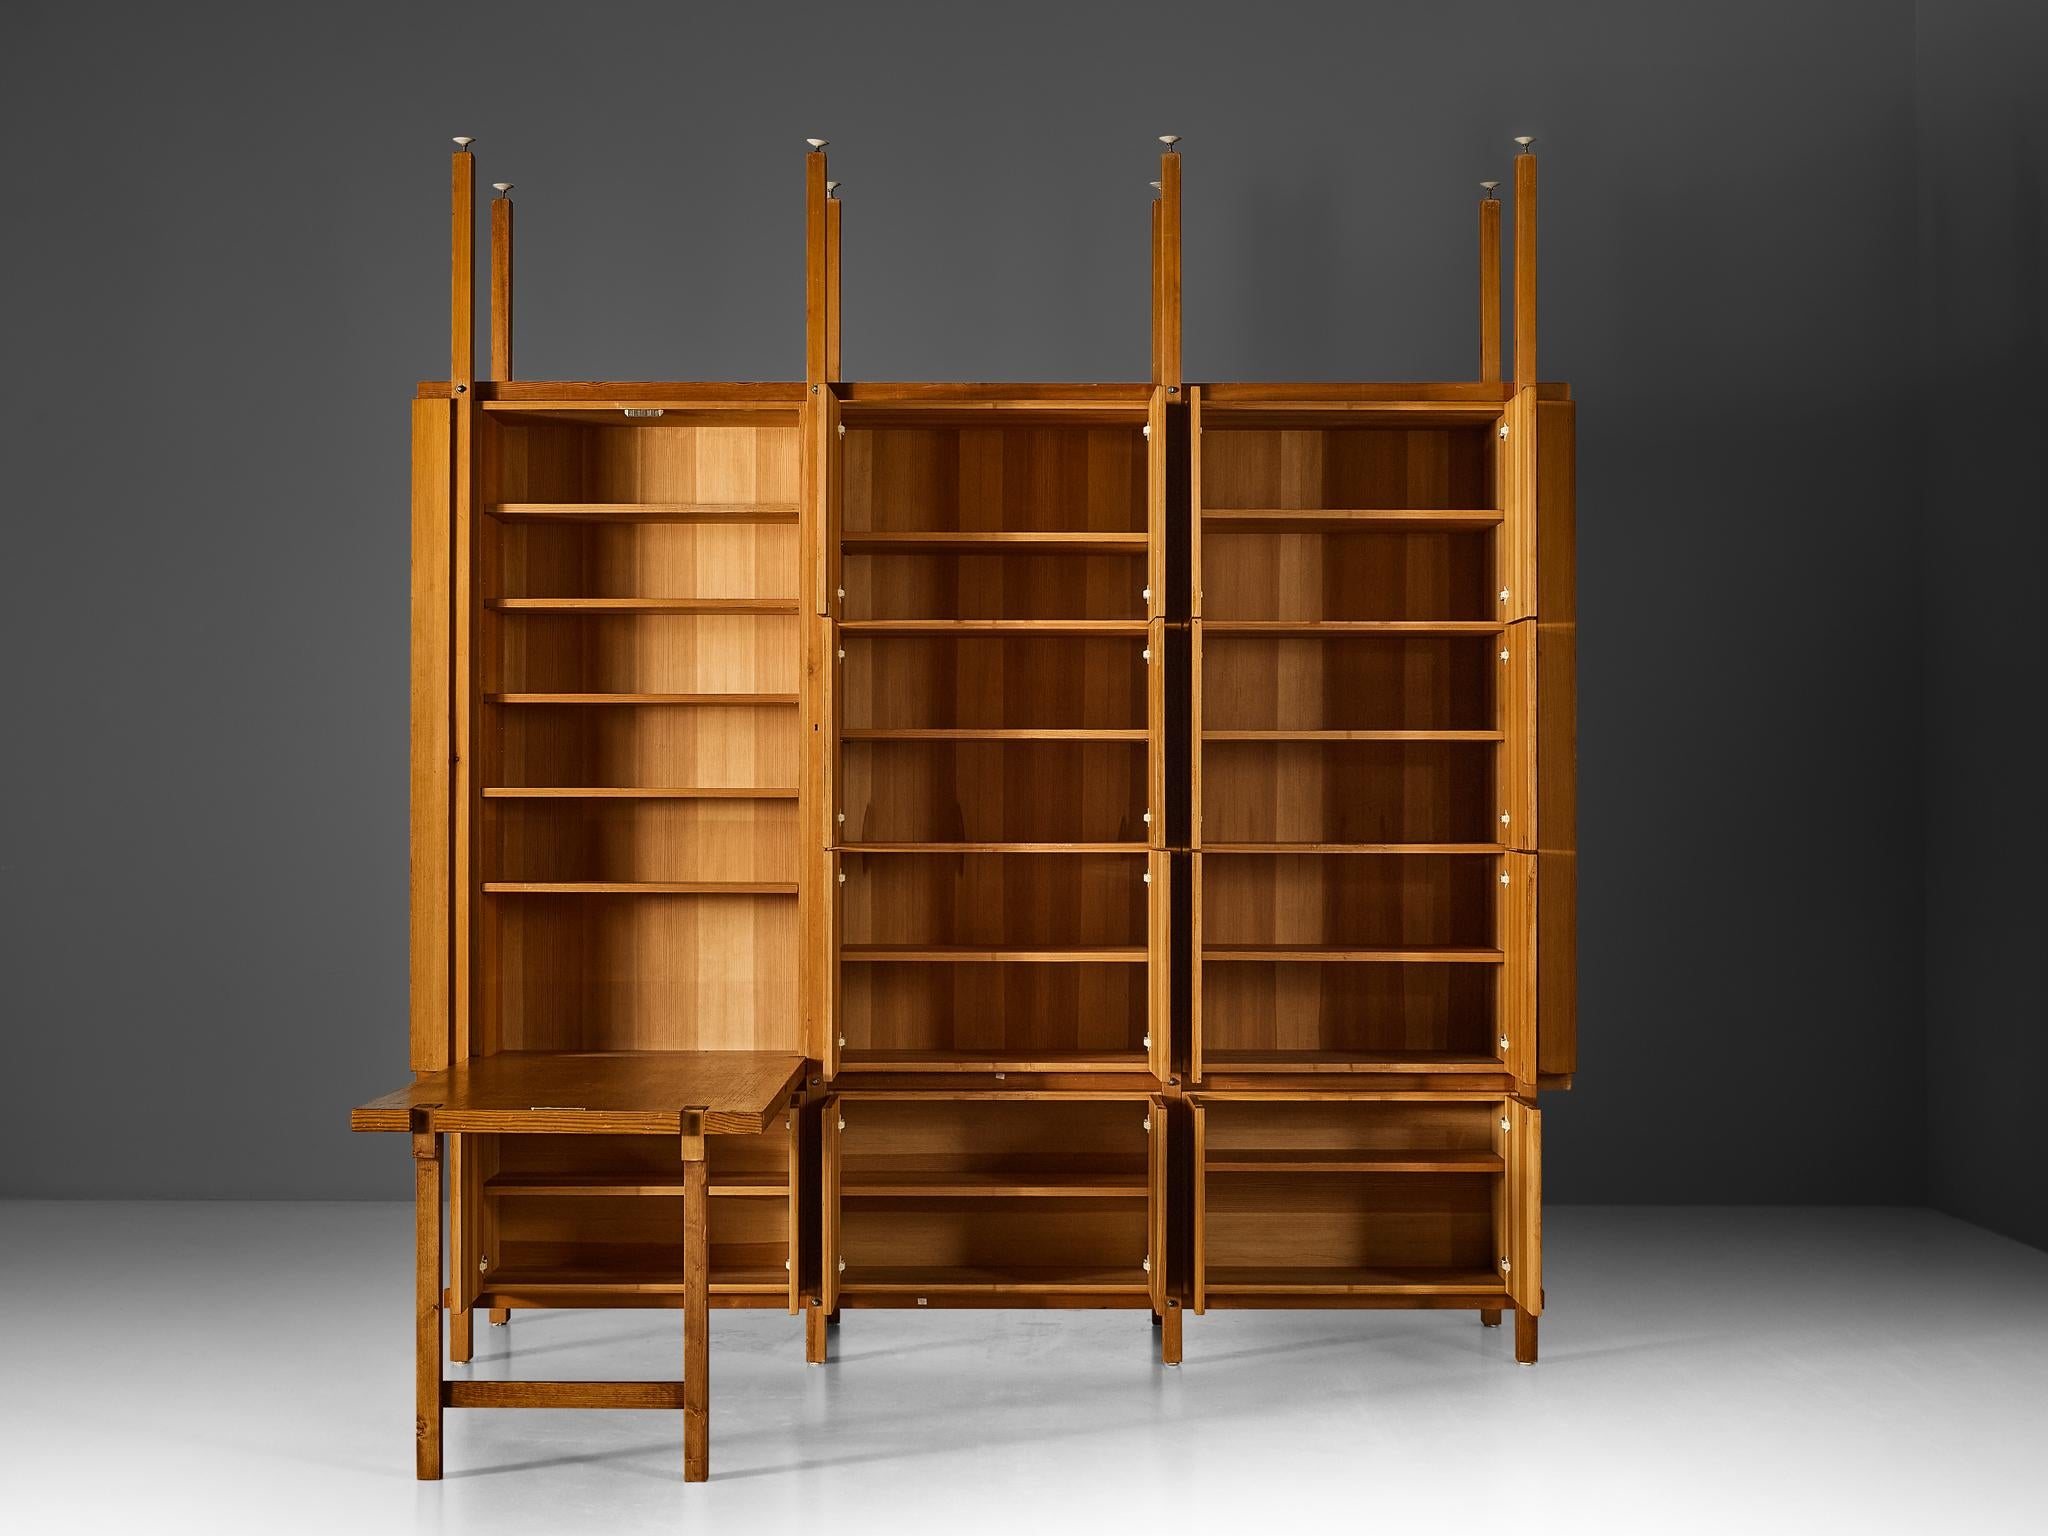 Monumental Wall Unit or Room Divider In Pine